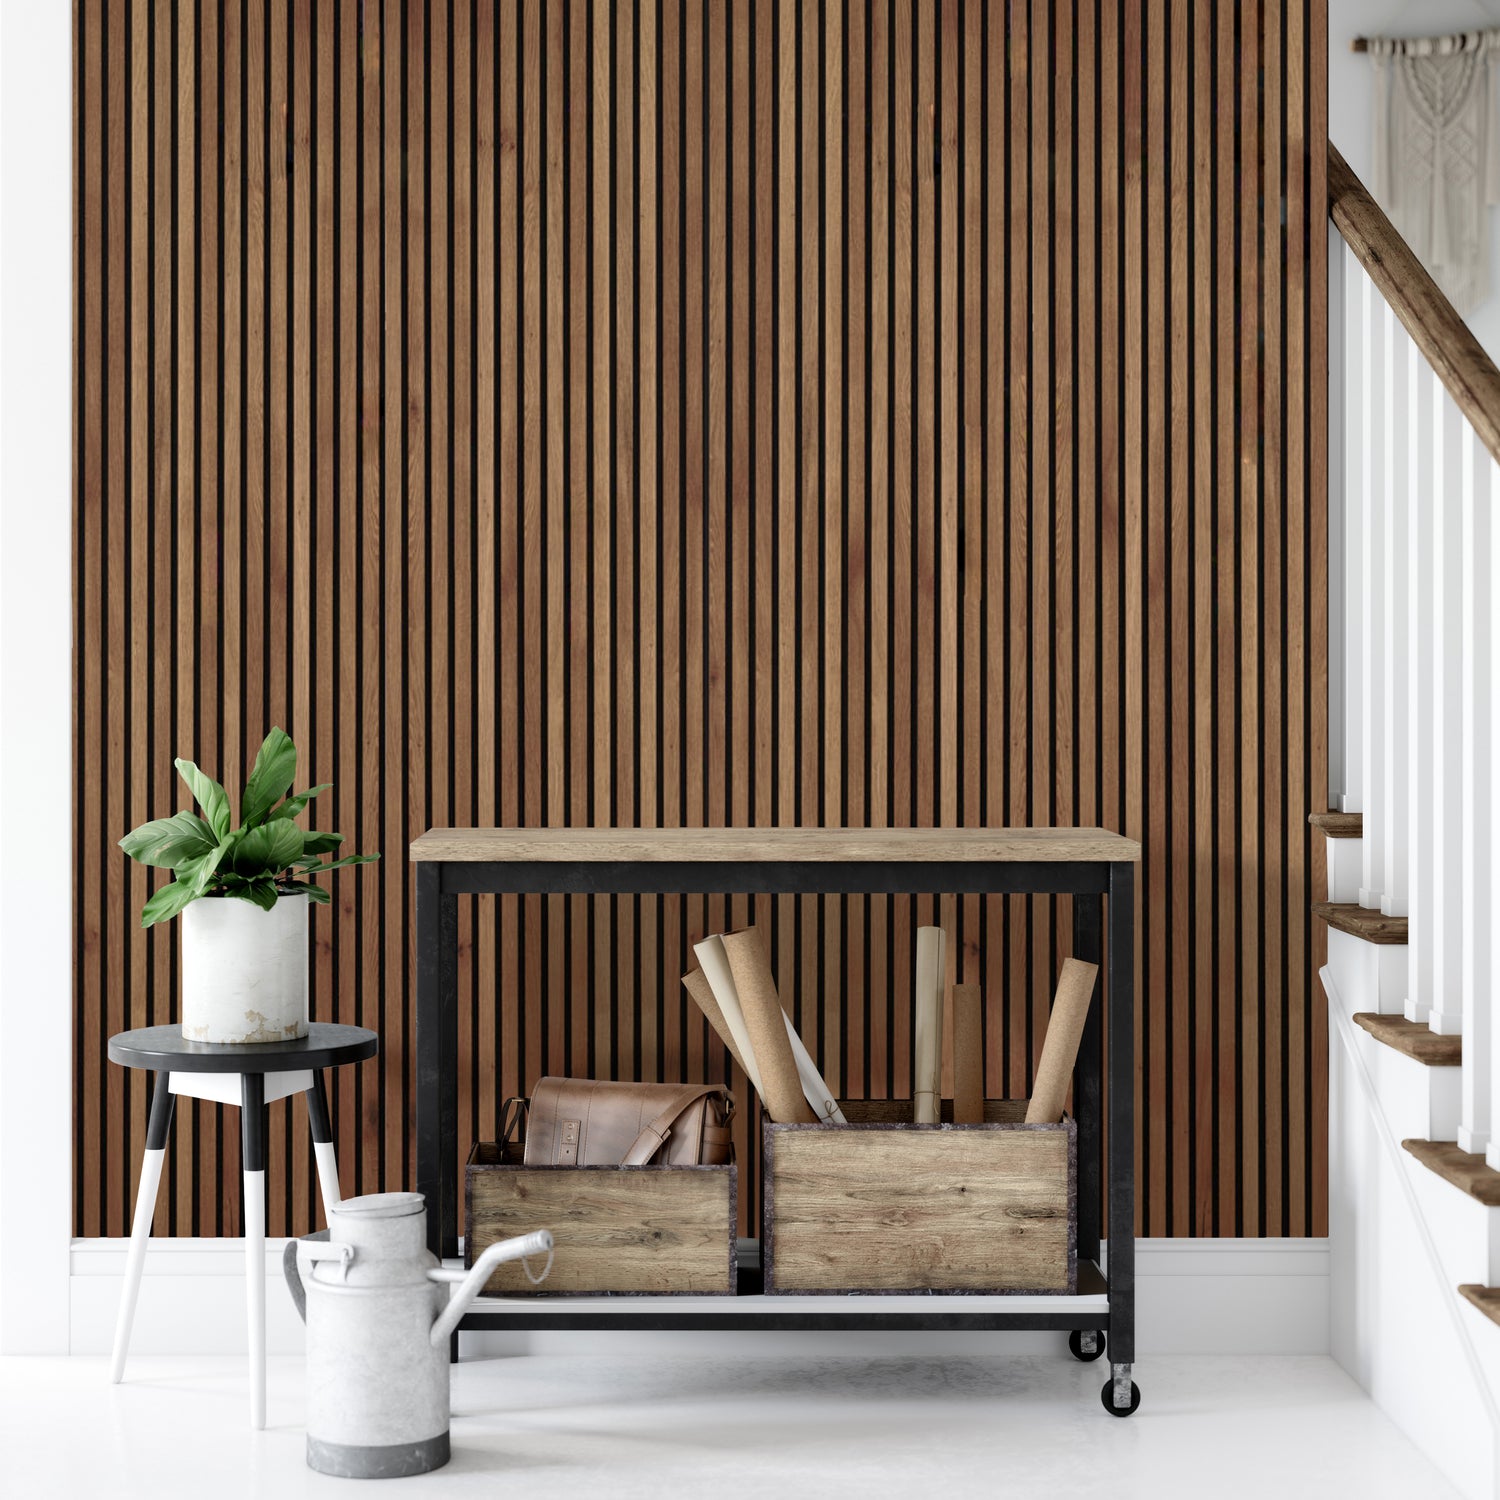 Create a luxurious space with our eco-friendly wood wall panels.